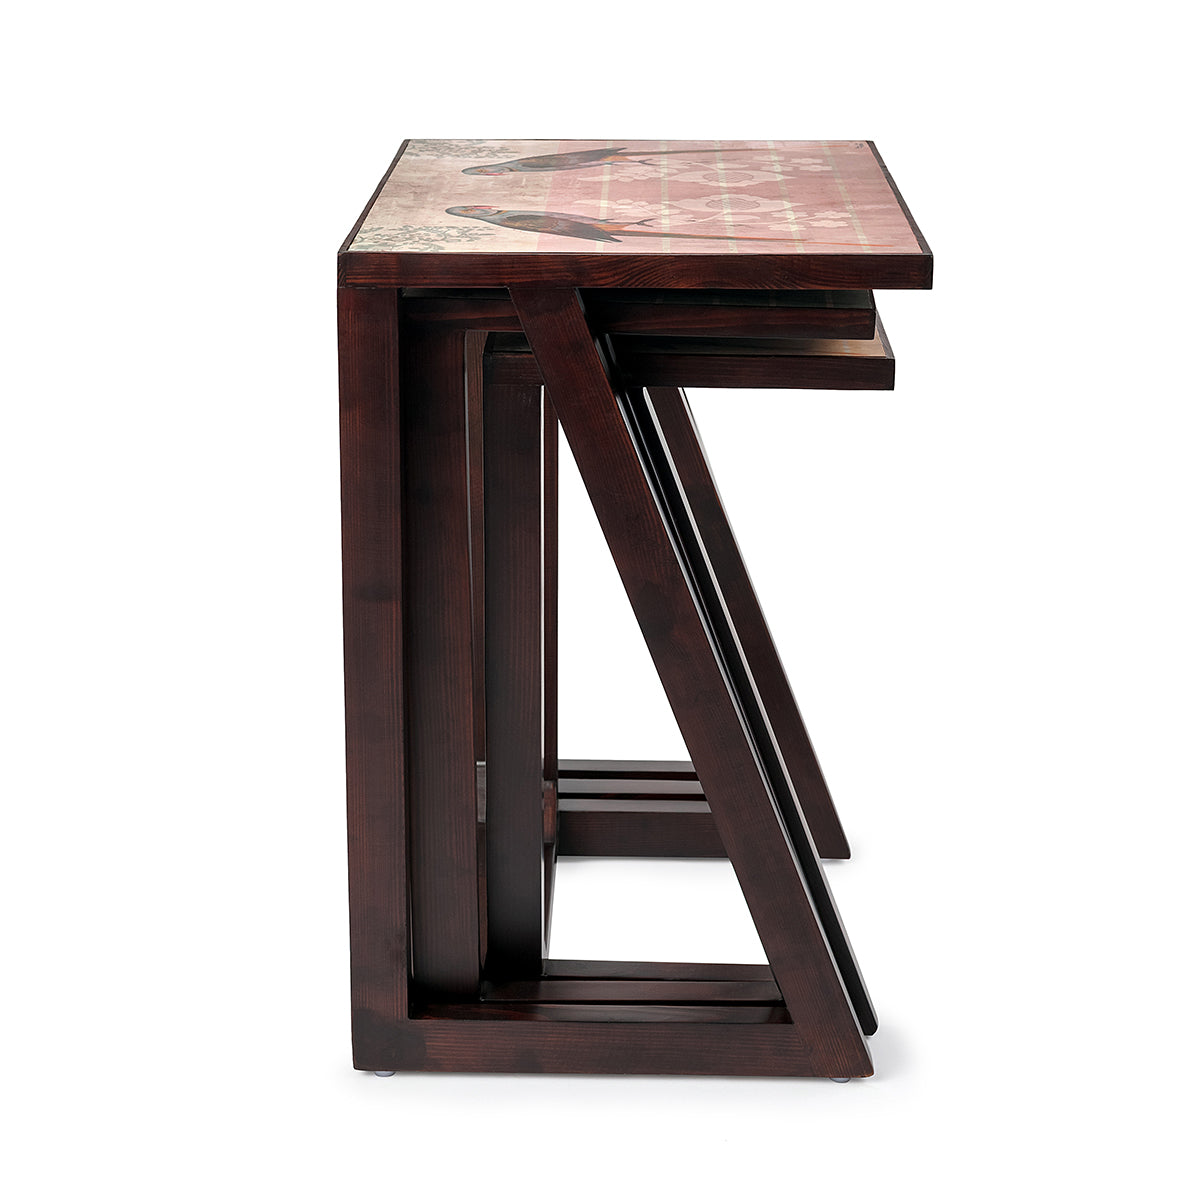 Parrot Nesting Tables (Set of 3)